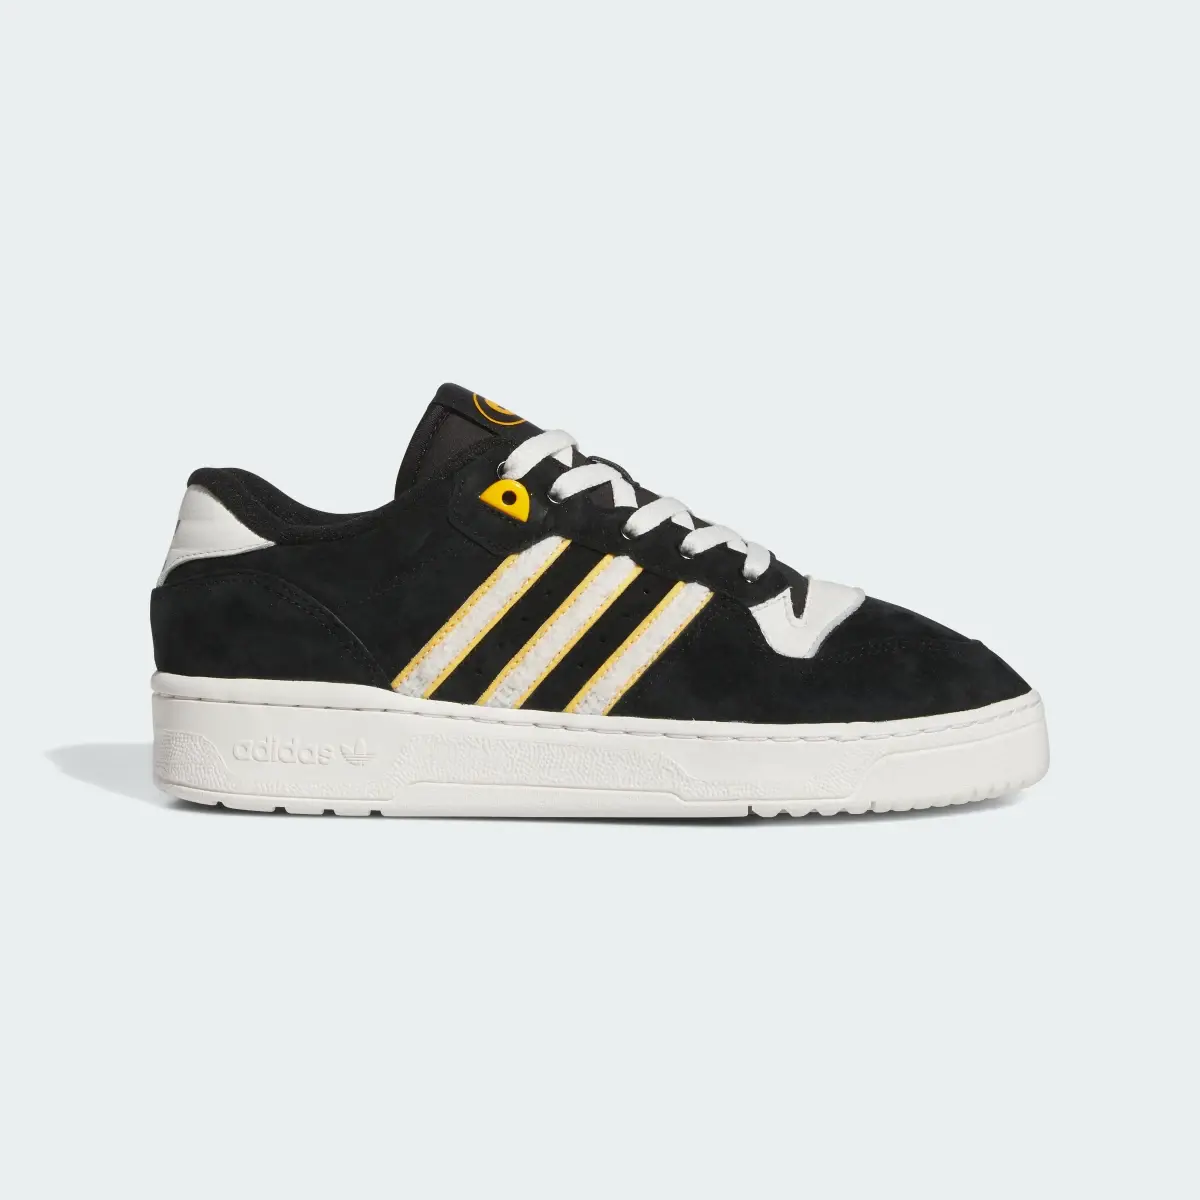 Adidas Grambling State Rivalry Low Shoes. 2